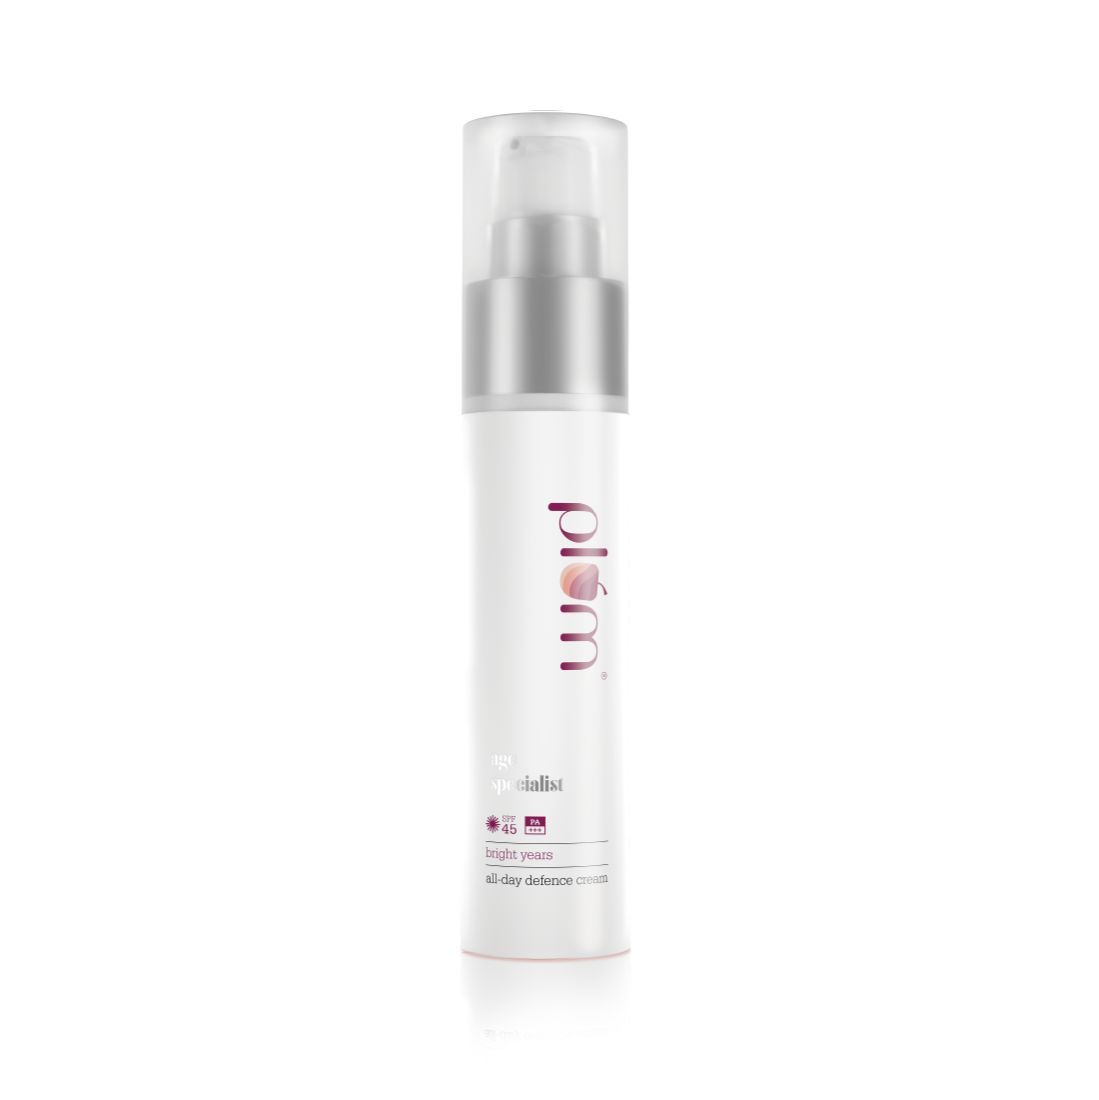 Buy Plum Bright Years All-Day Defence Cream SPF 45 PA+++ (50 ml) - Purplle